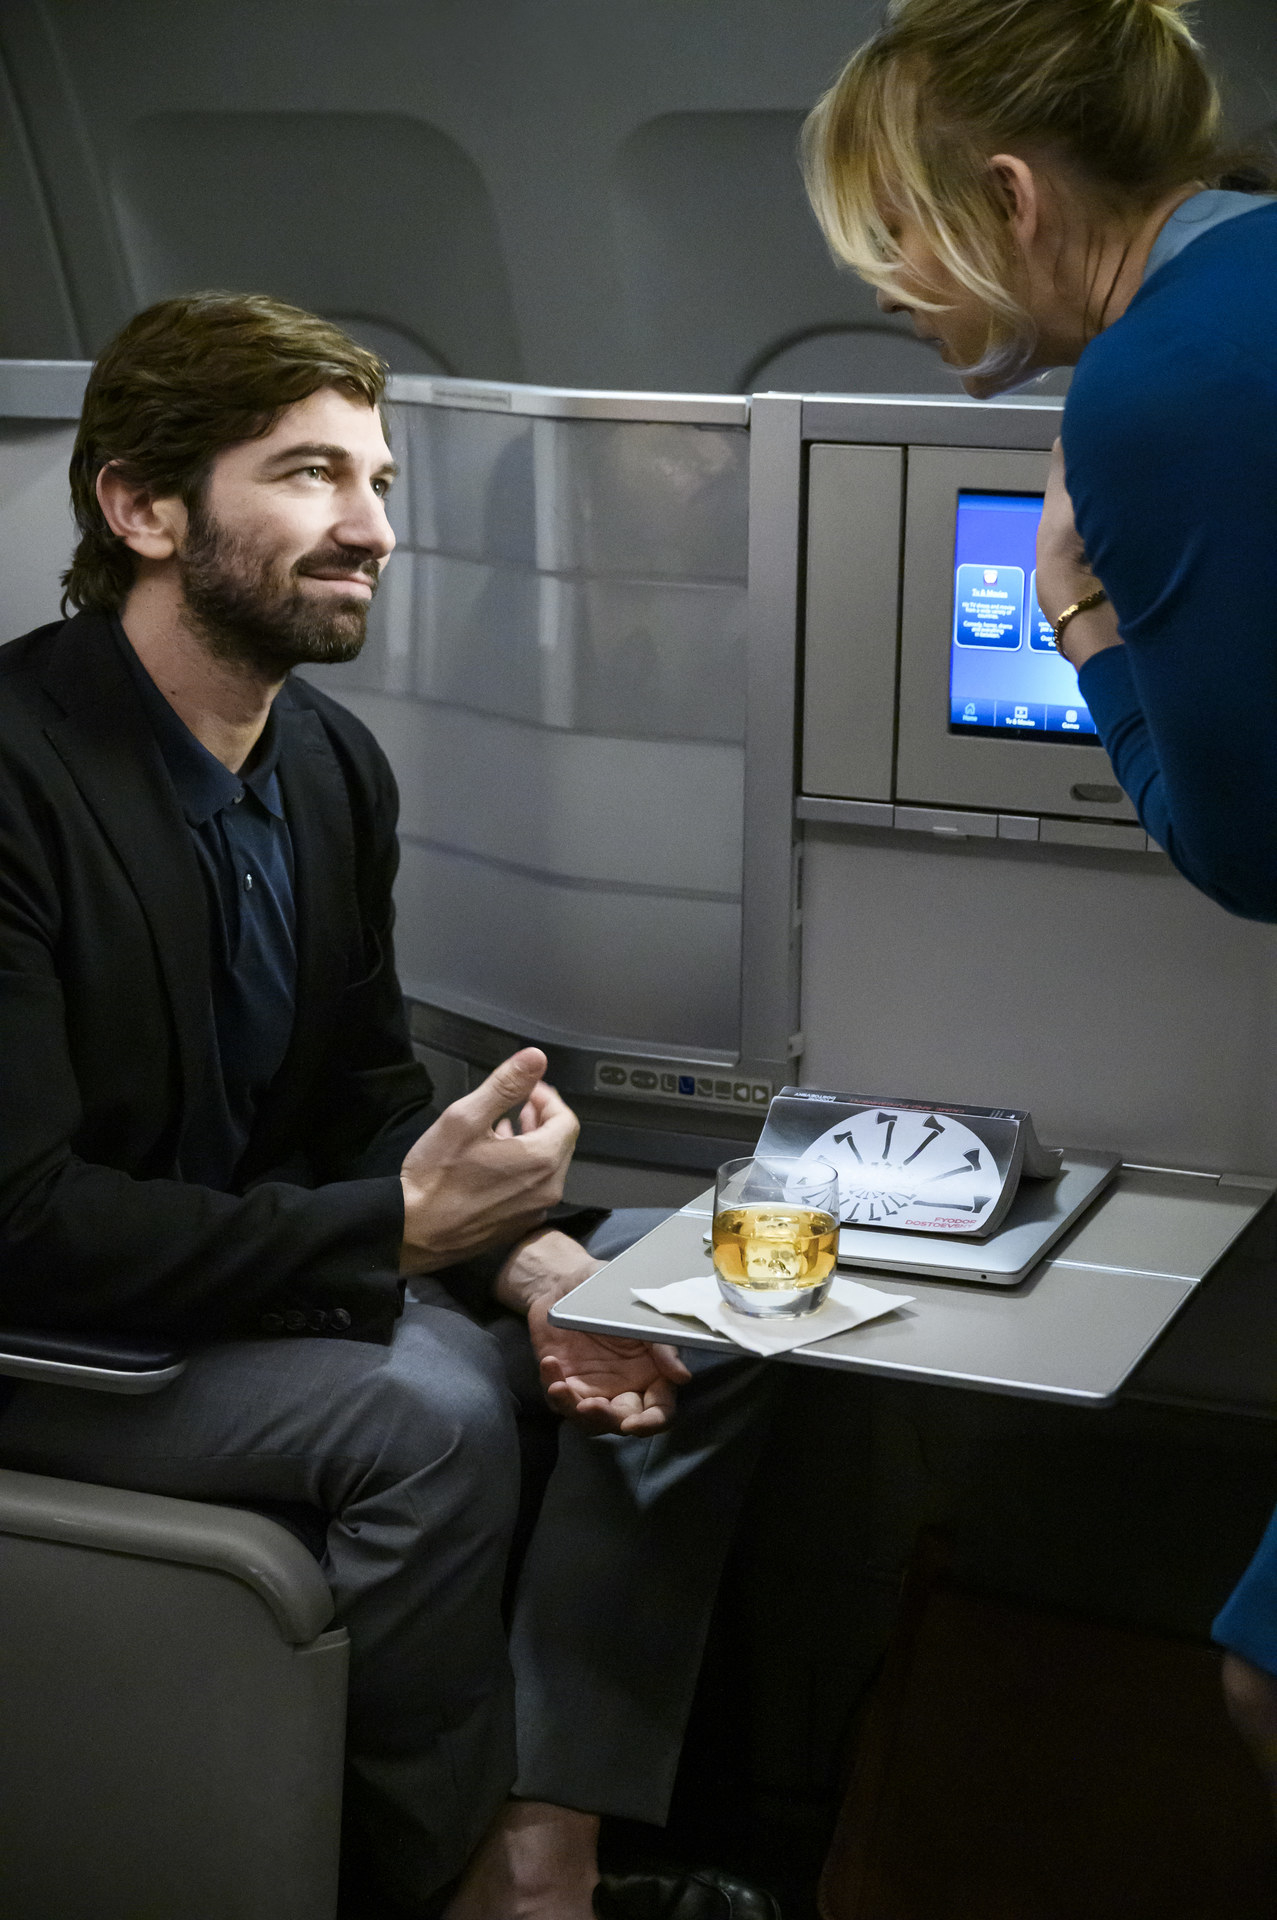 Kaley attending to Michiel in an airplane in a scene from The Flight Attendant